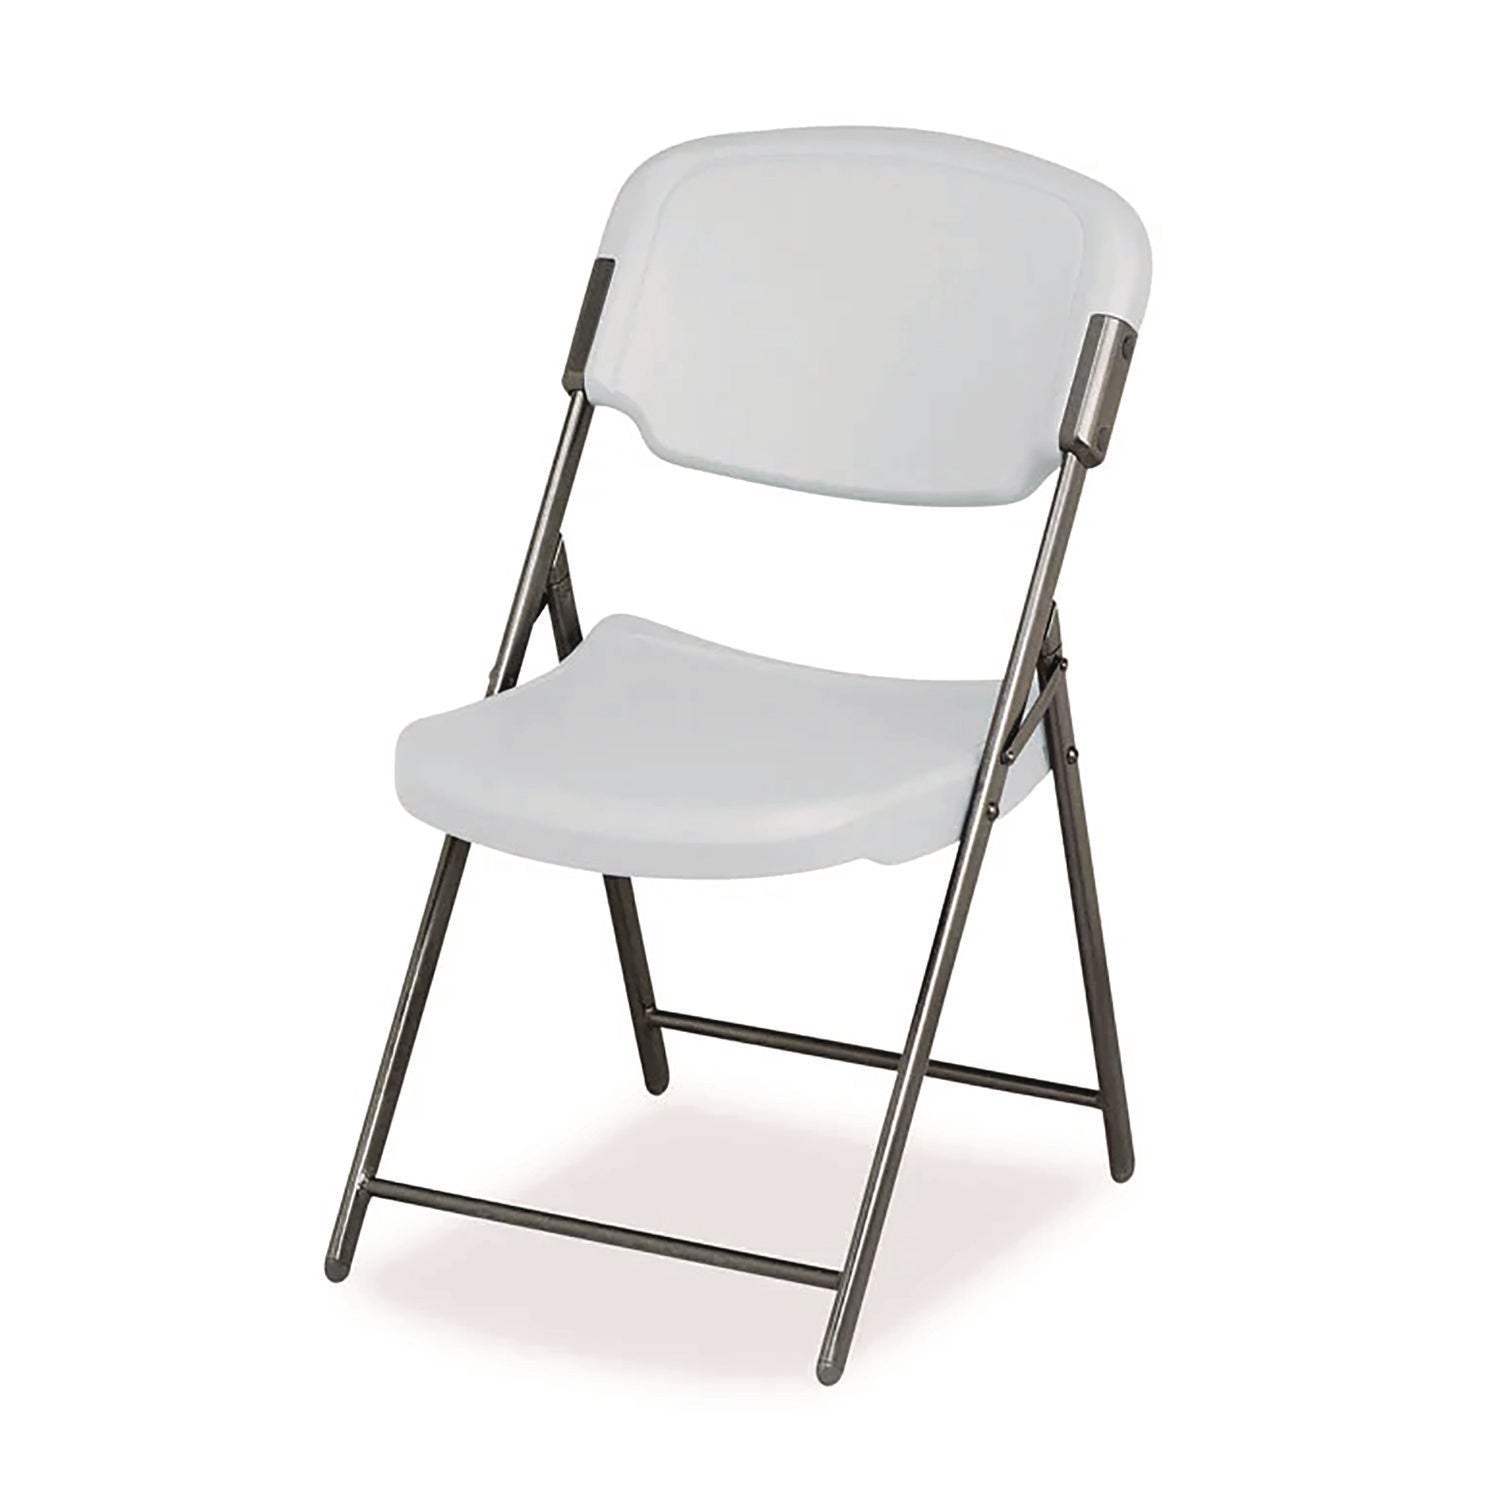 Rough n Ready Commercial Folding Chair, Supports Up to 350 lb, 15.25" Seat Height, Platinum Seat, Platinum Back, Black Base - 2